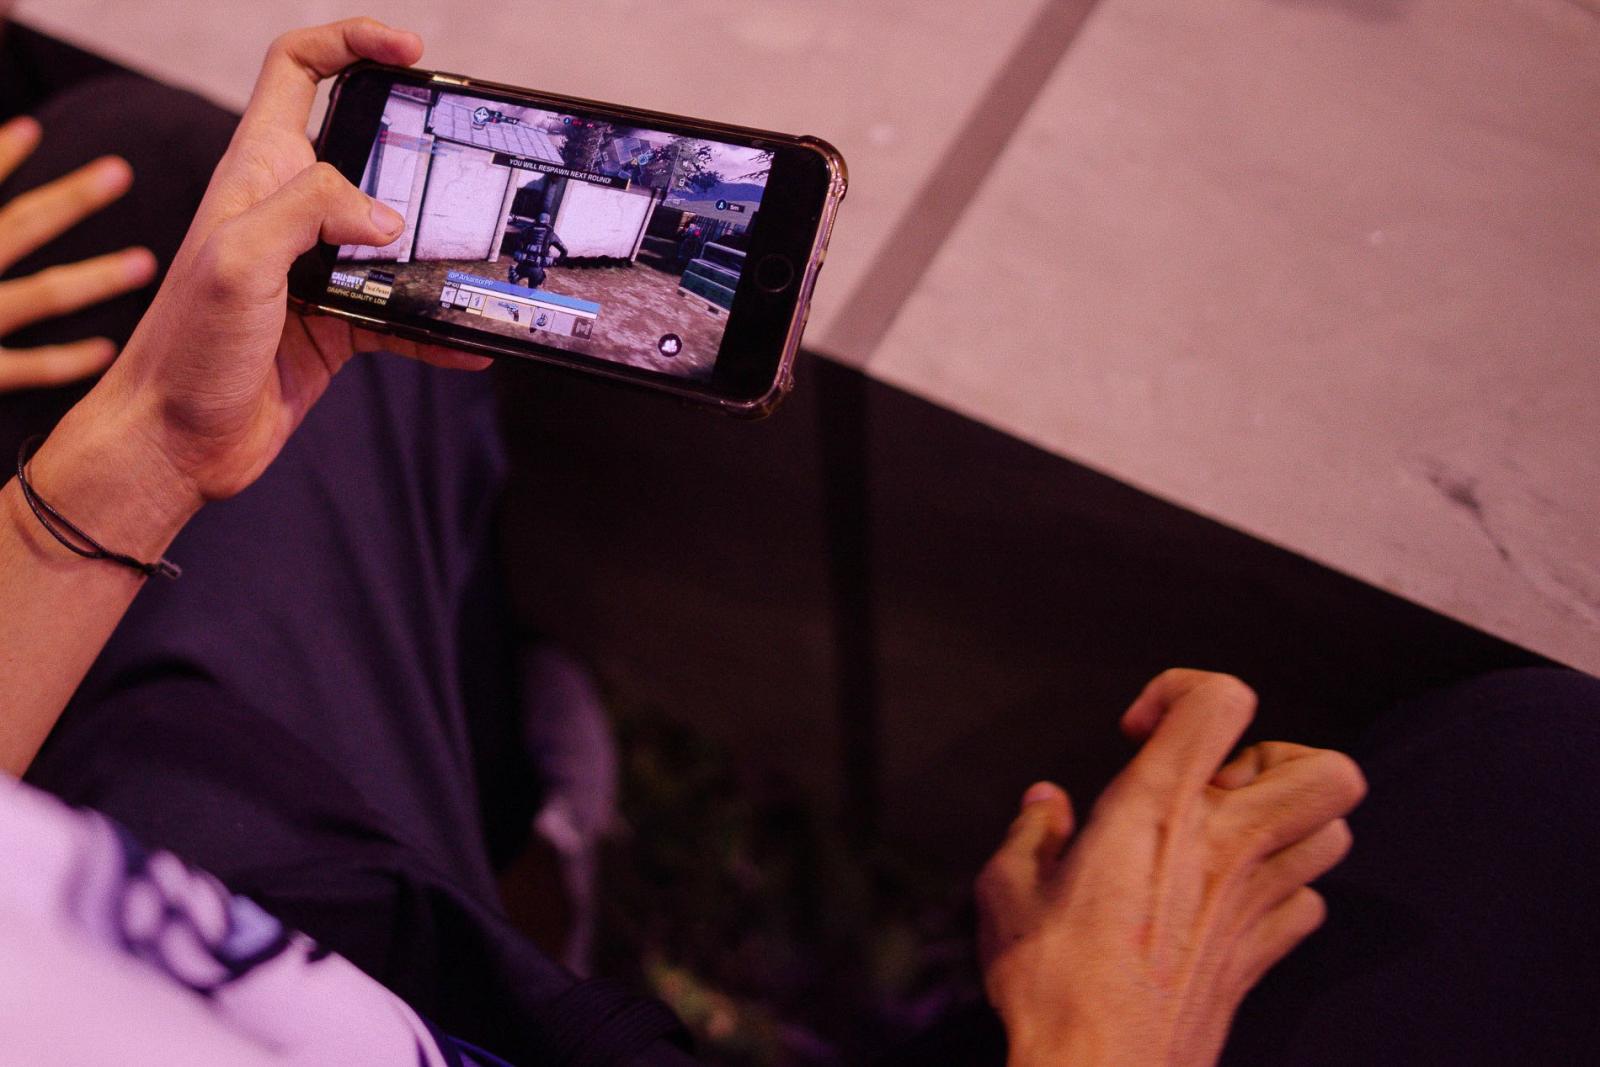 Virtual Insanity: Inside The Life of Pro-Gamers - Stretching fingers while gaming with smartphone